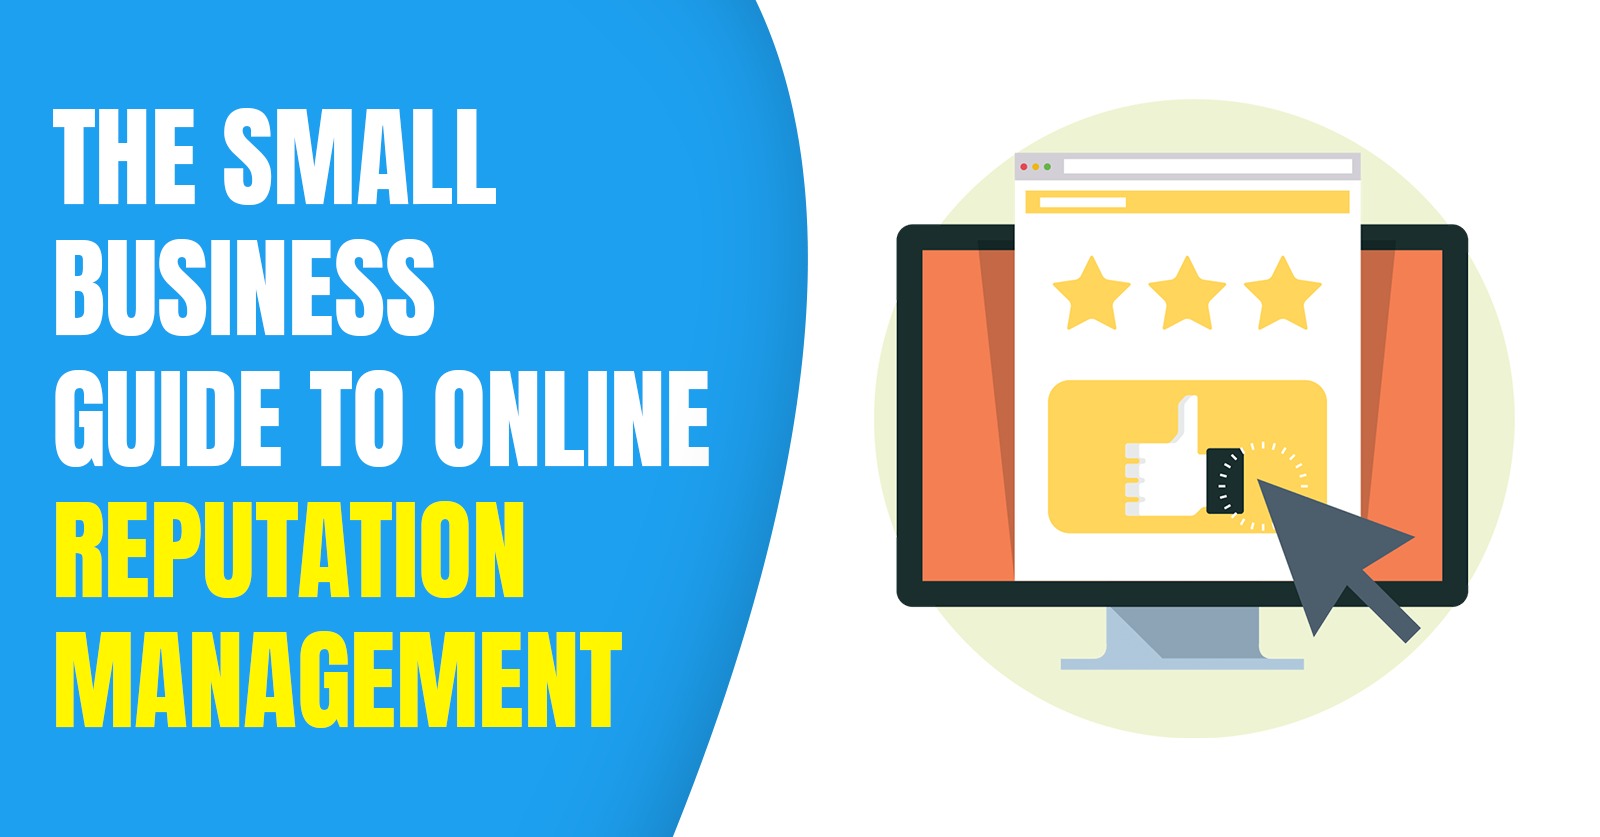 The Small Business Guide to Effective Online Reputation Management